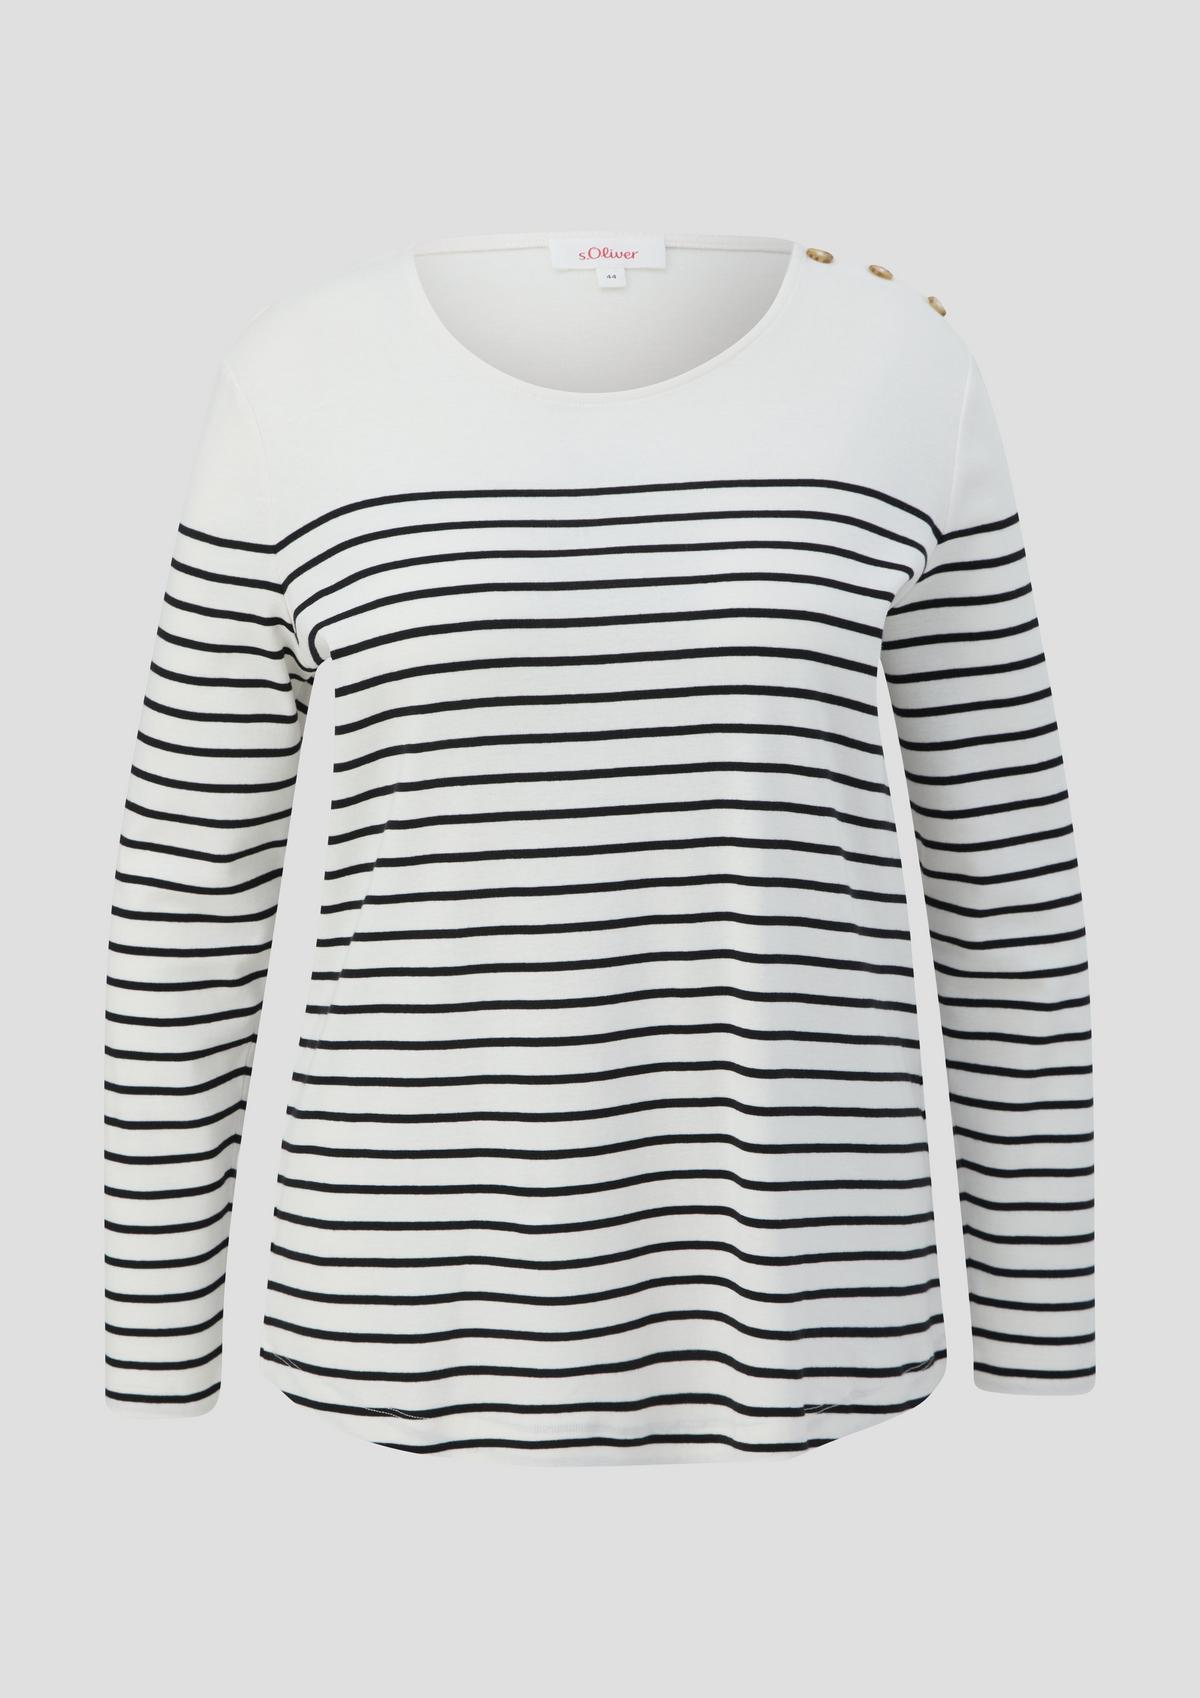 s.Oliver Long sleeve top with decorative buttons